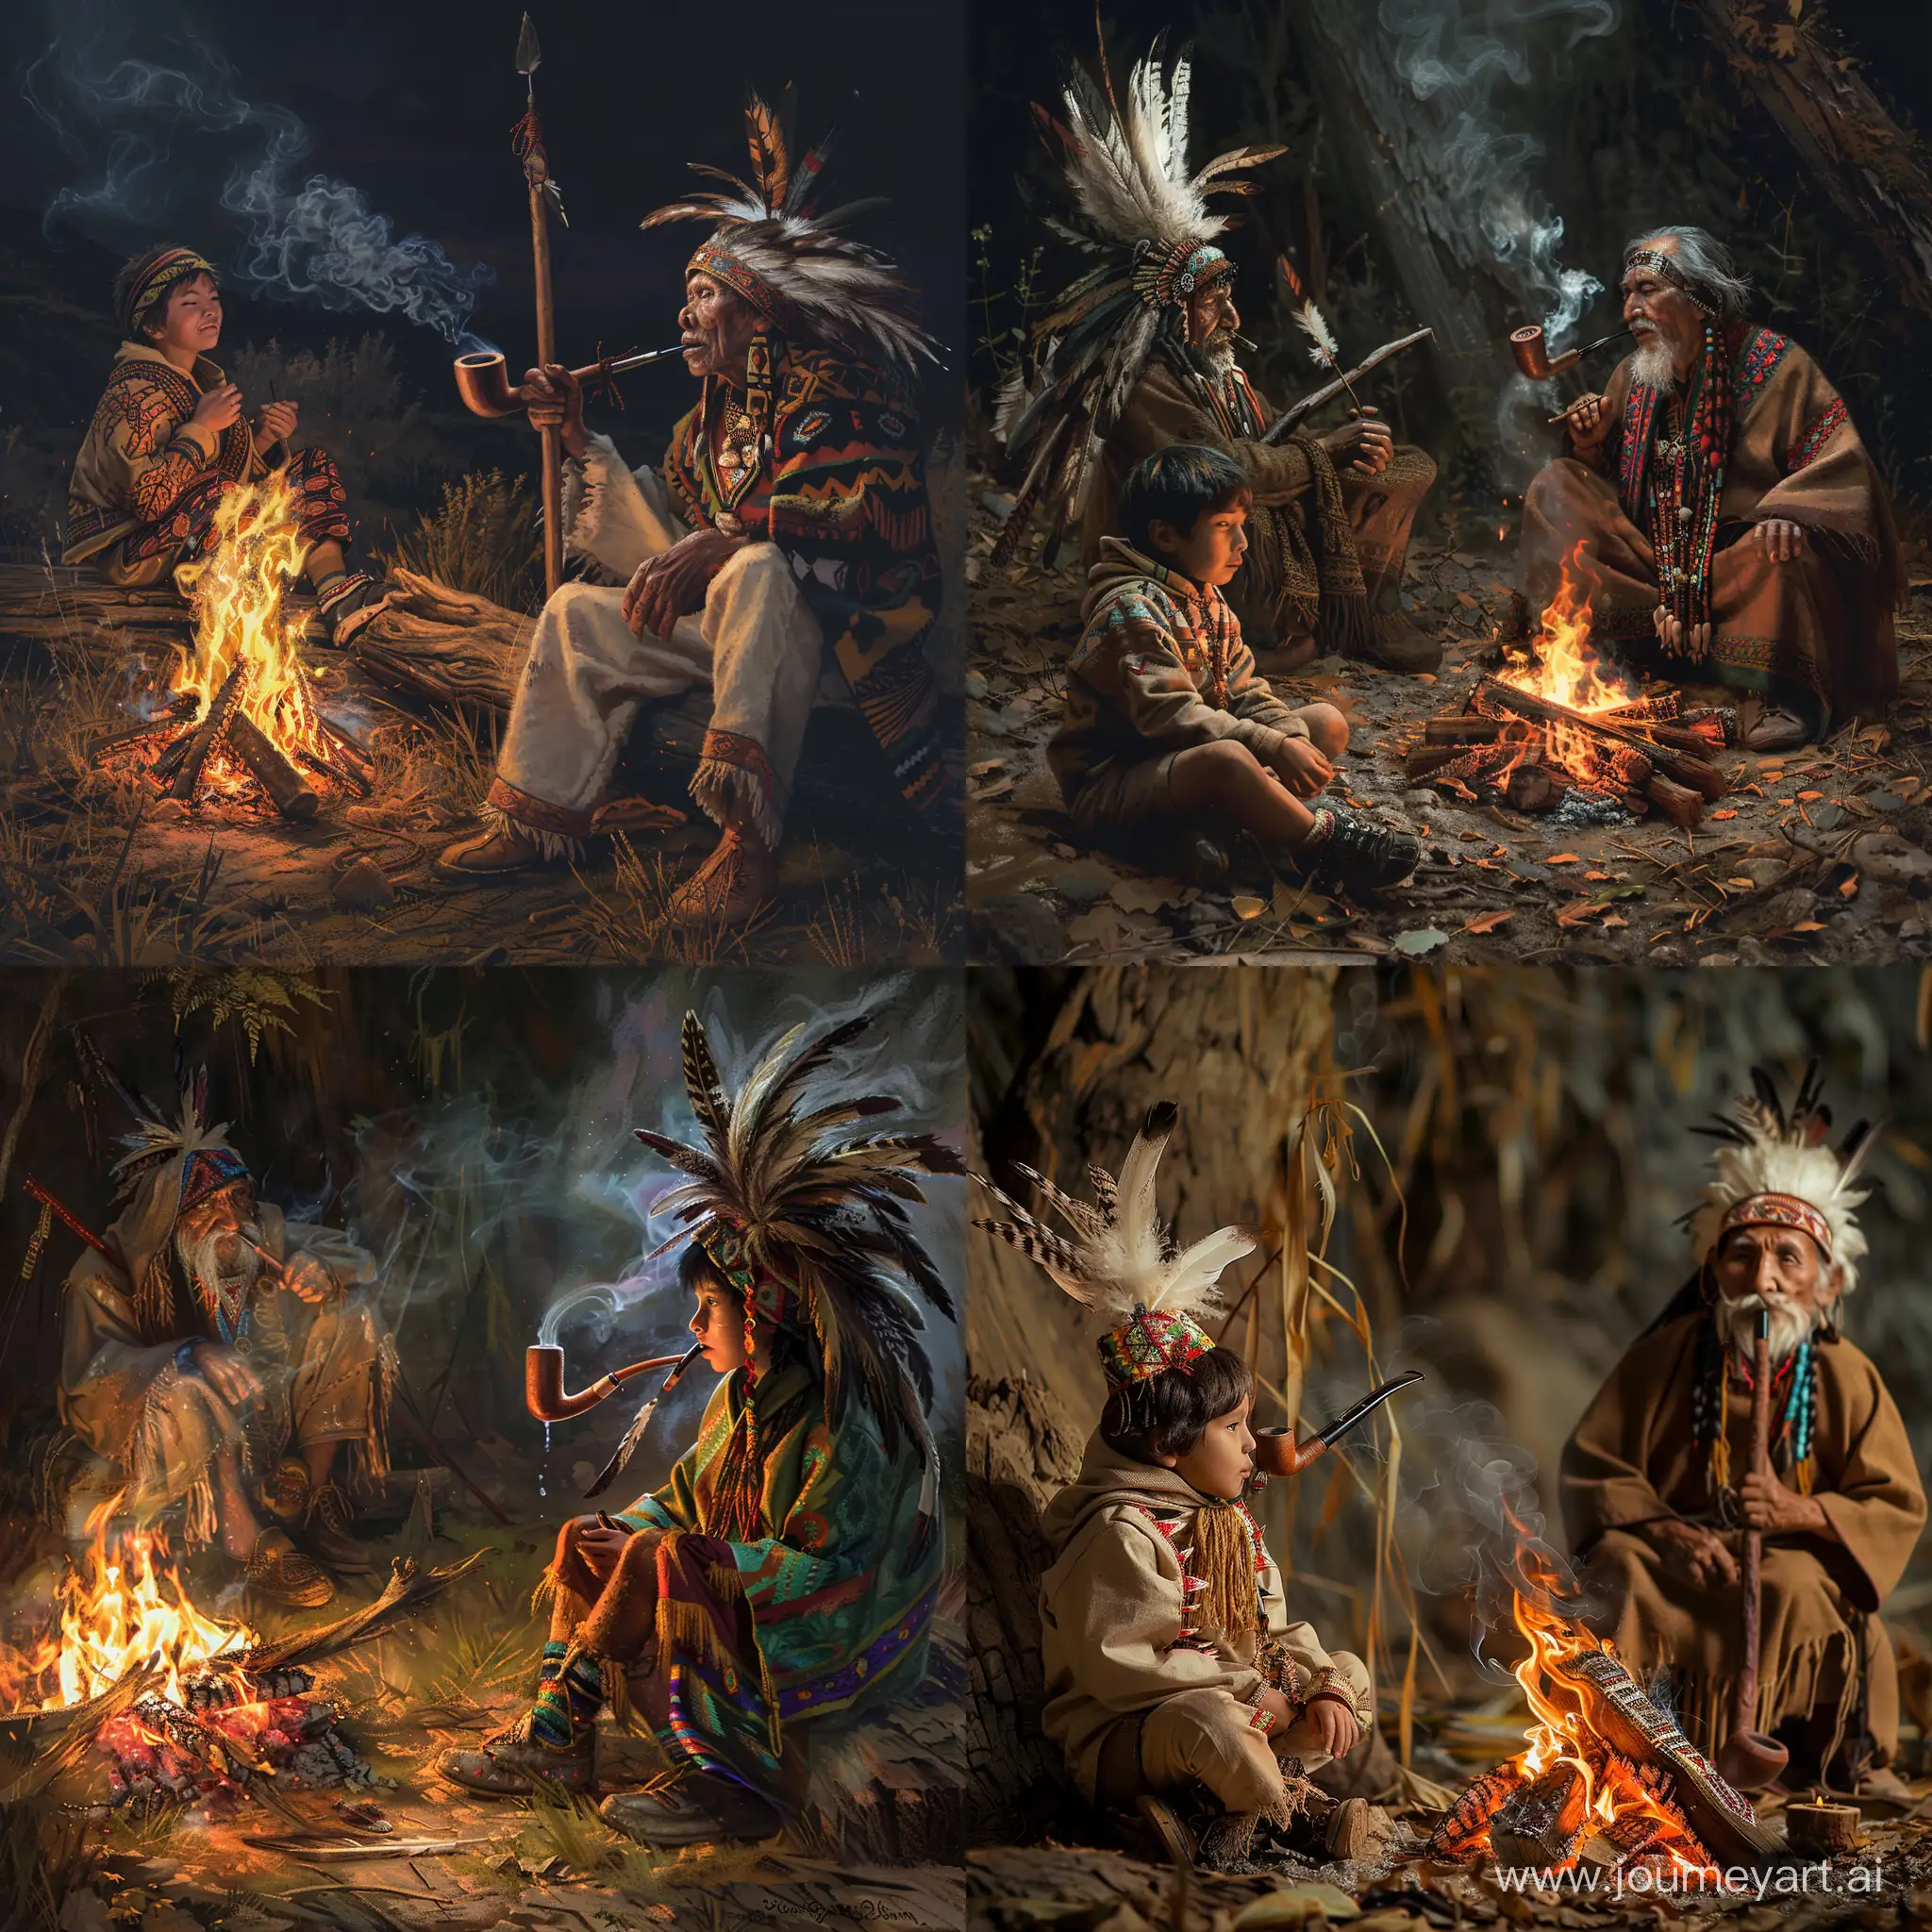  a boy in a poncho is sitting next to a shamanic bonfire. a feather headdress on his head. an old shaman sits next to her and smokes a long pipe